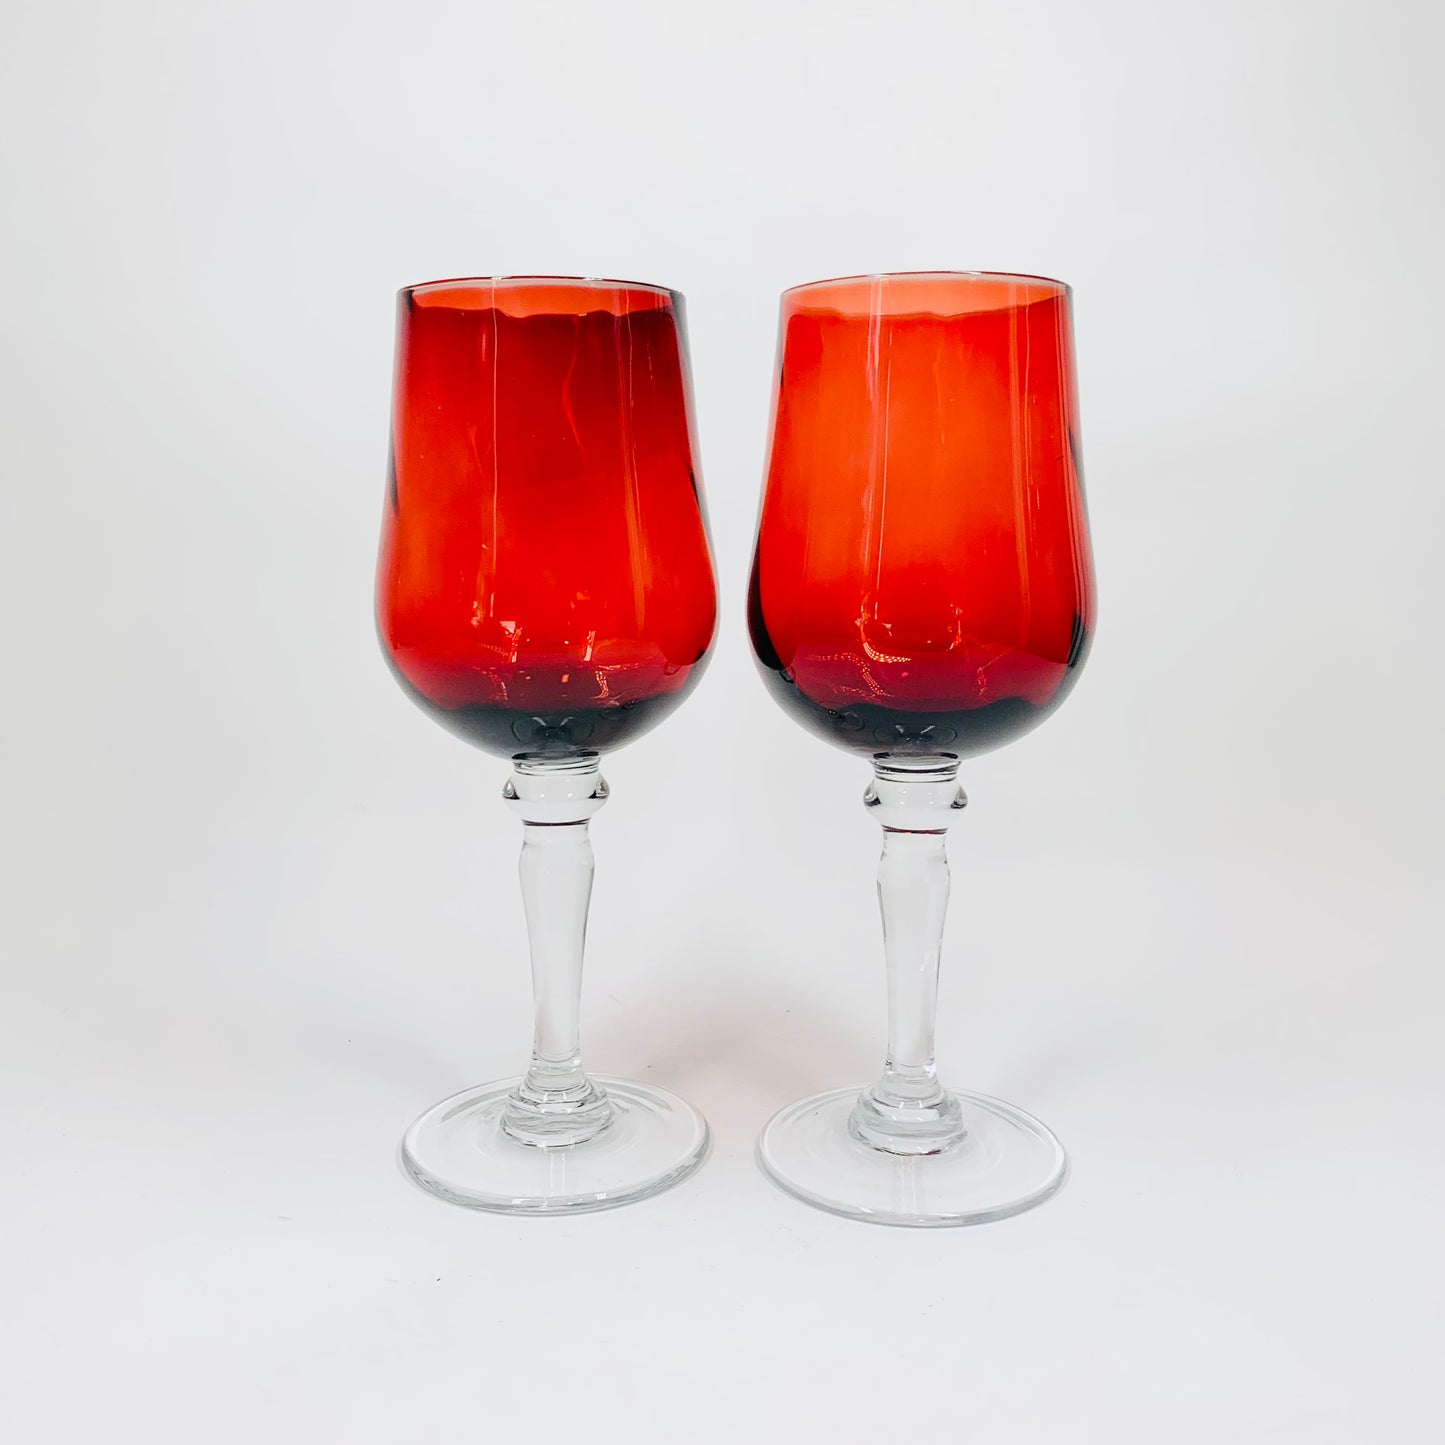 Midcentury Italian red wine glasses with clear stems